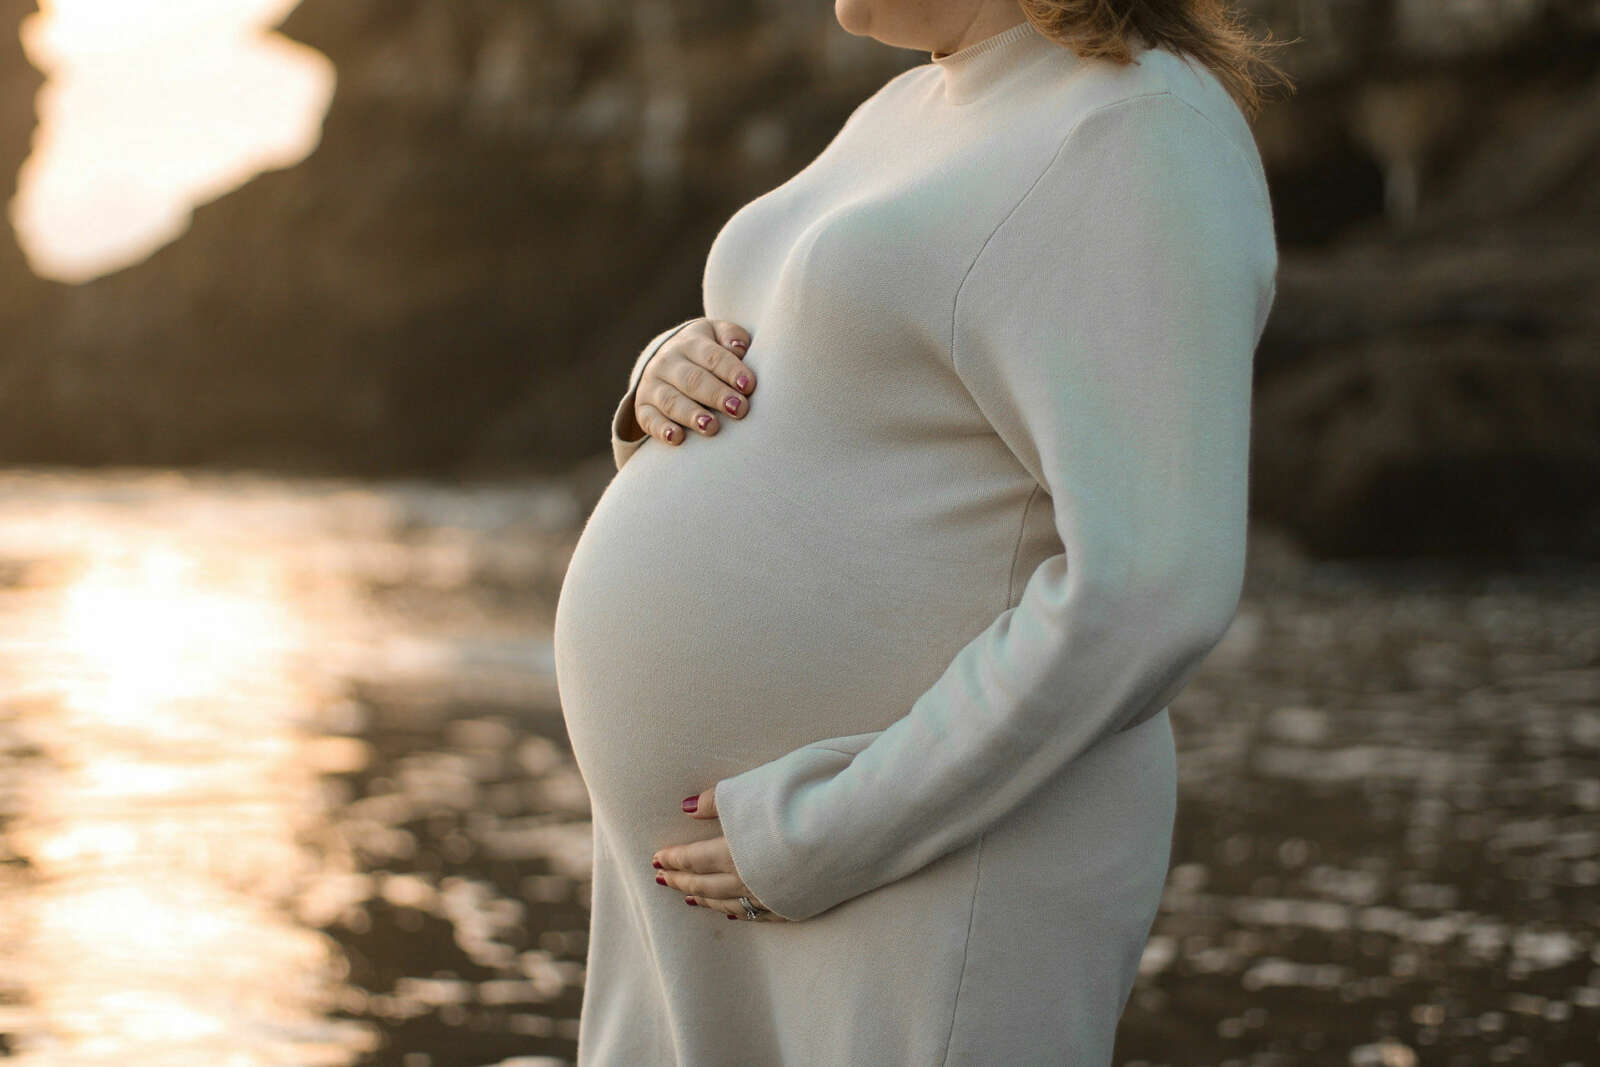 Image shows Natalie standing in a beach wearing a white long sleeve dress holding her baby bump looking towards the sunset.